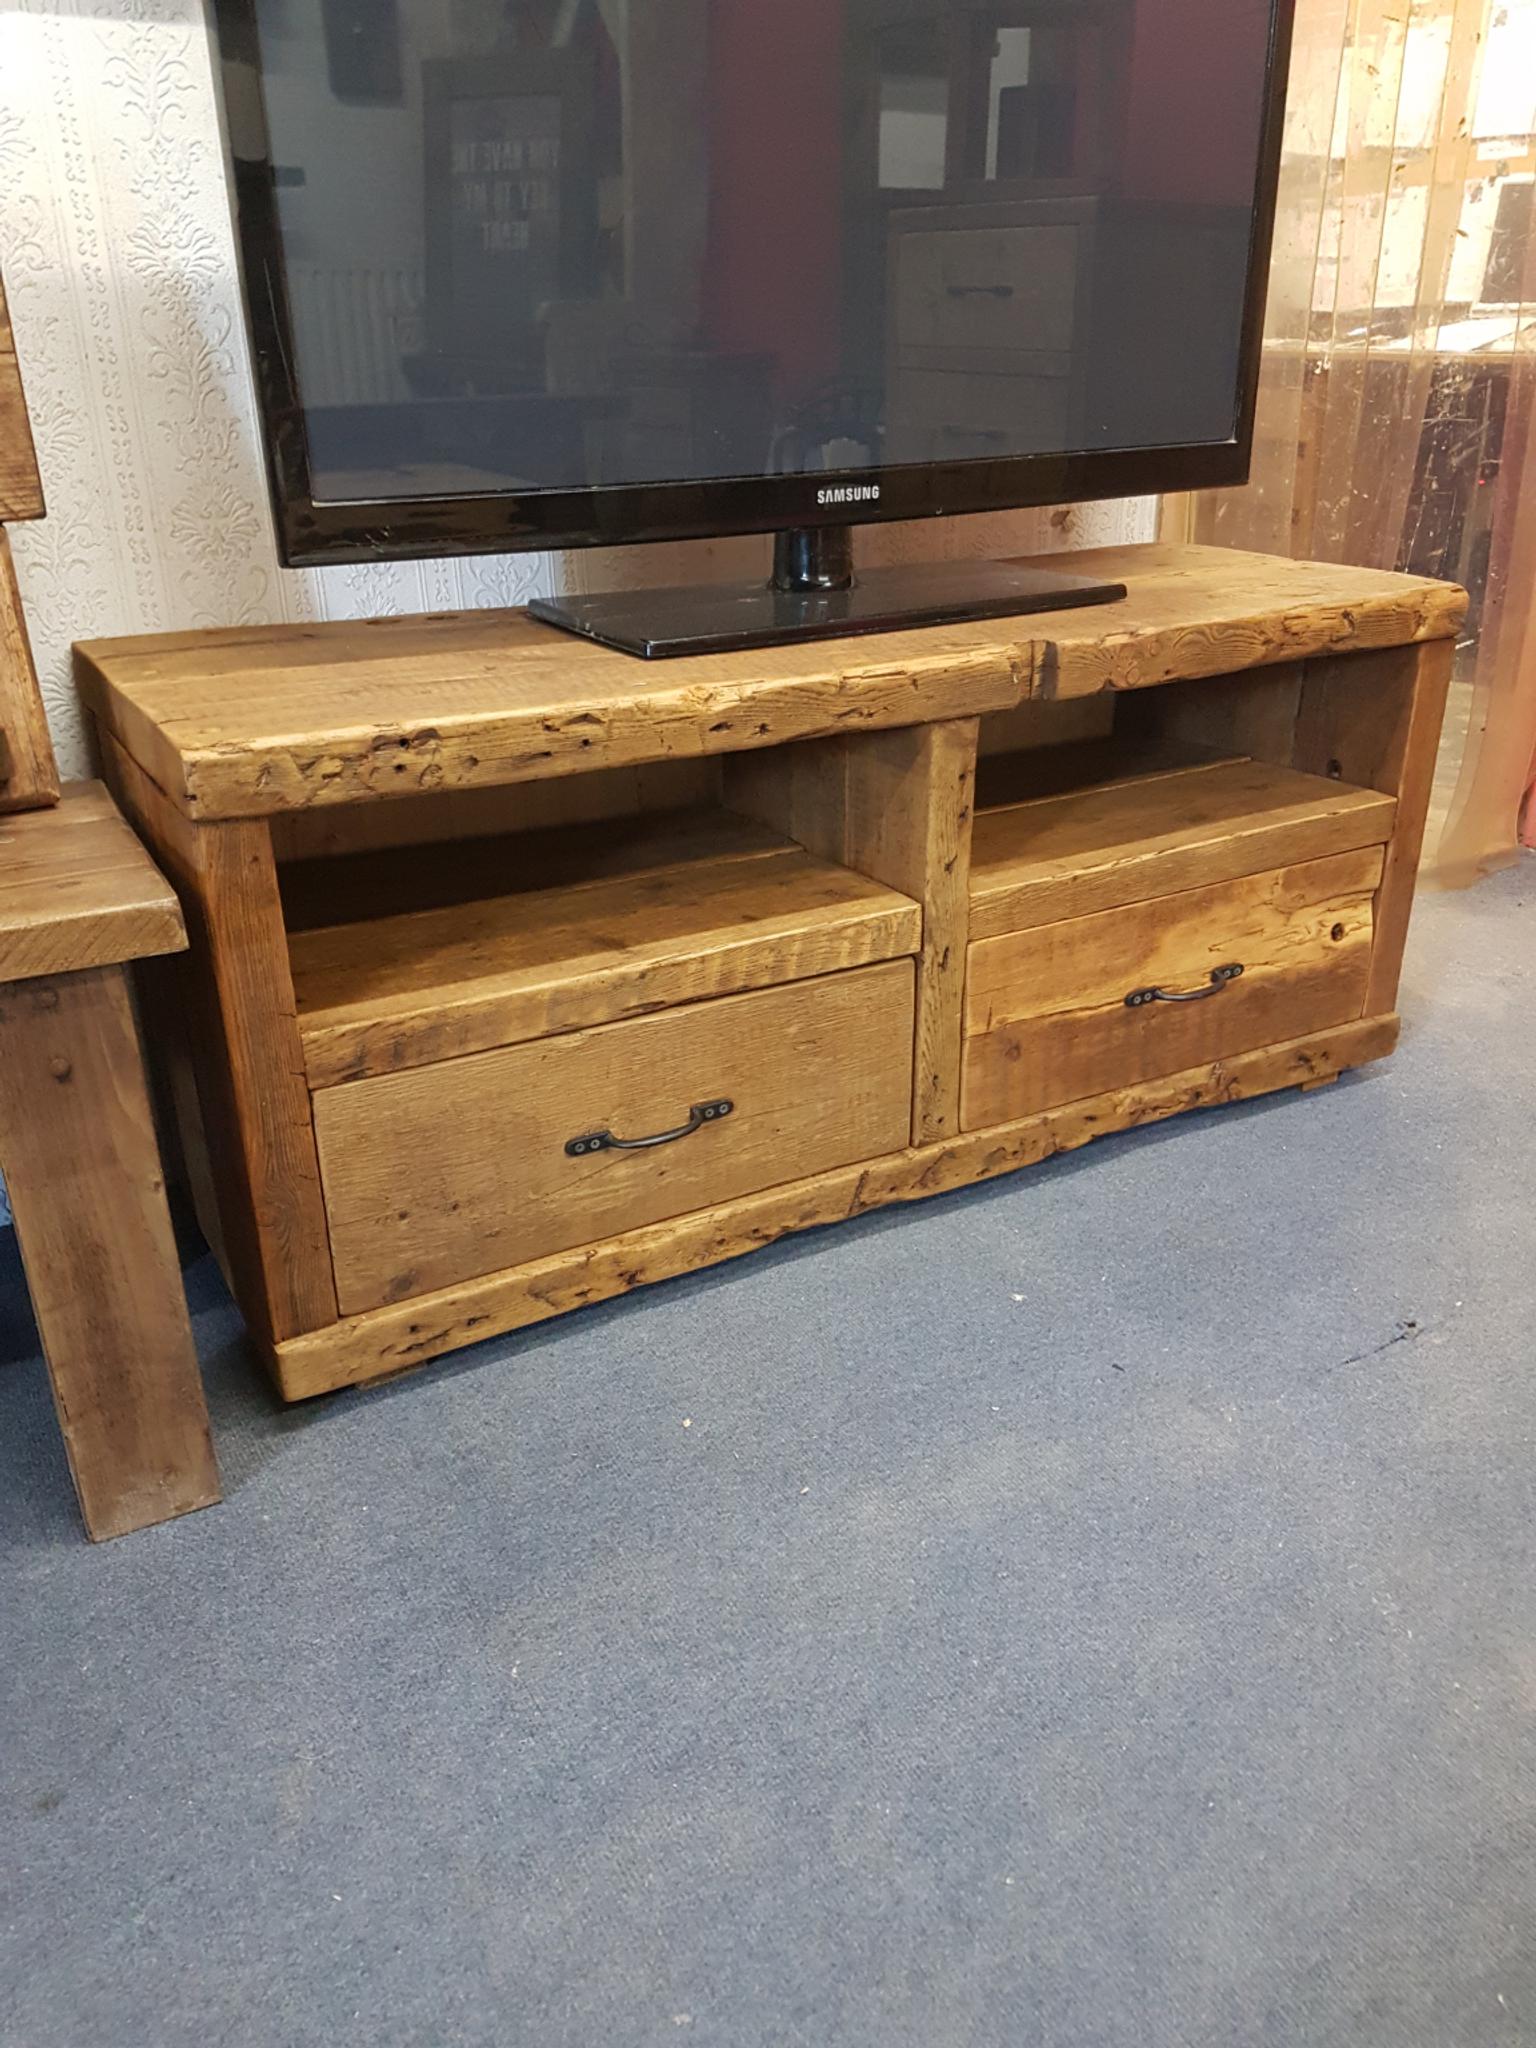 REAL SOLID WOOD TV STAND ENTERTAINMENT UNIT CHUNKY RUSTIC PLANK PINE FURNITURE